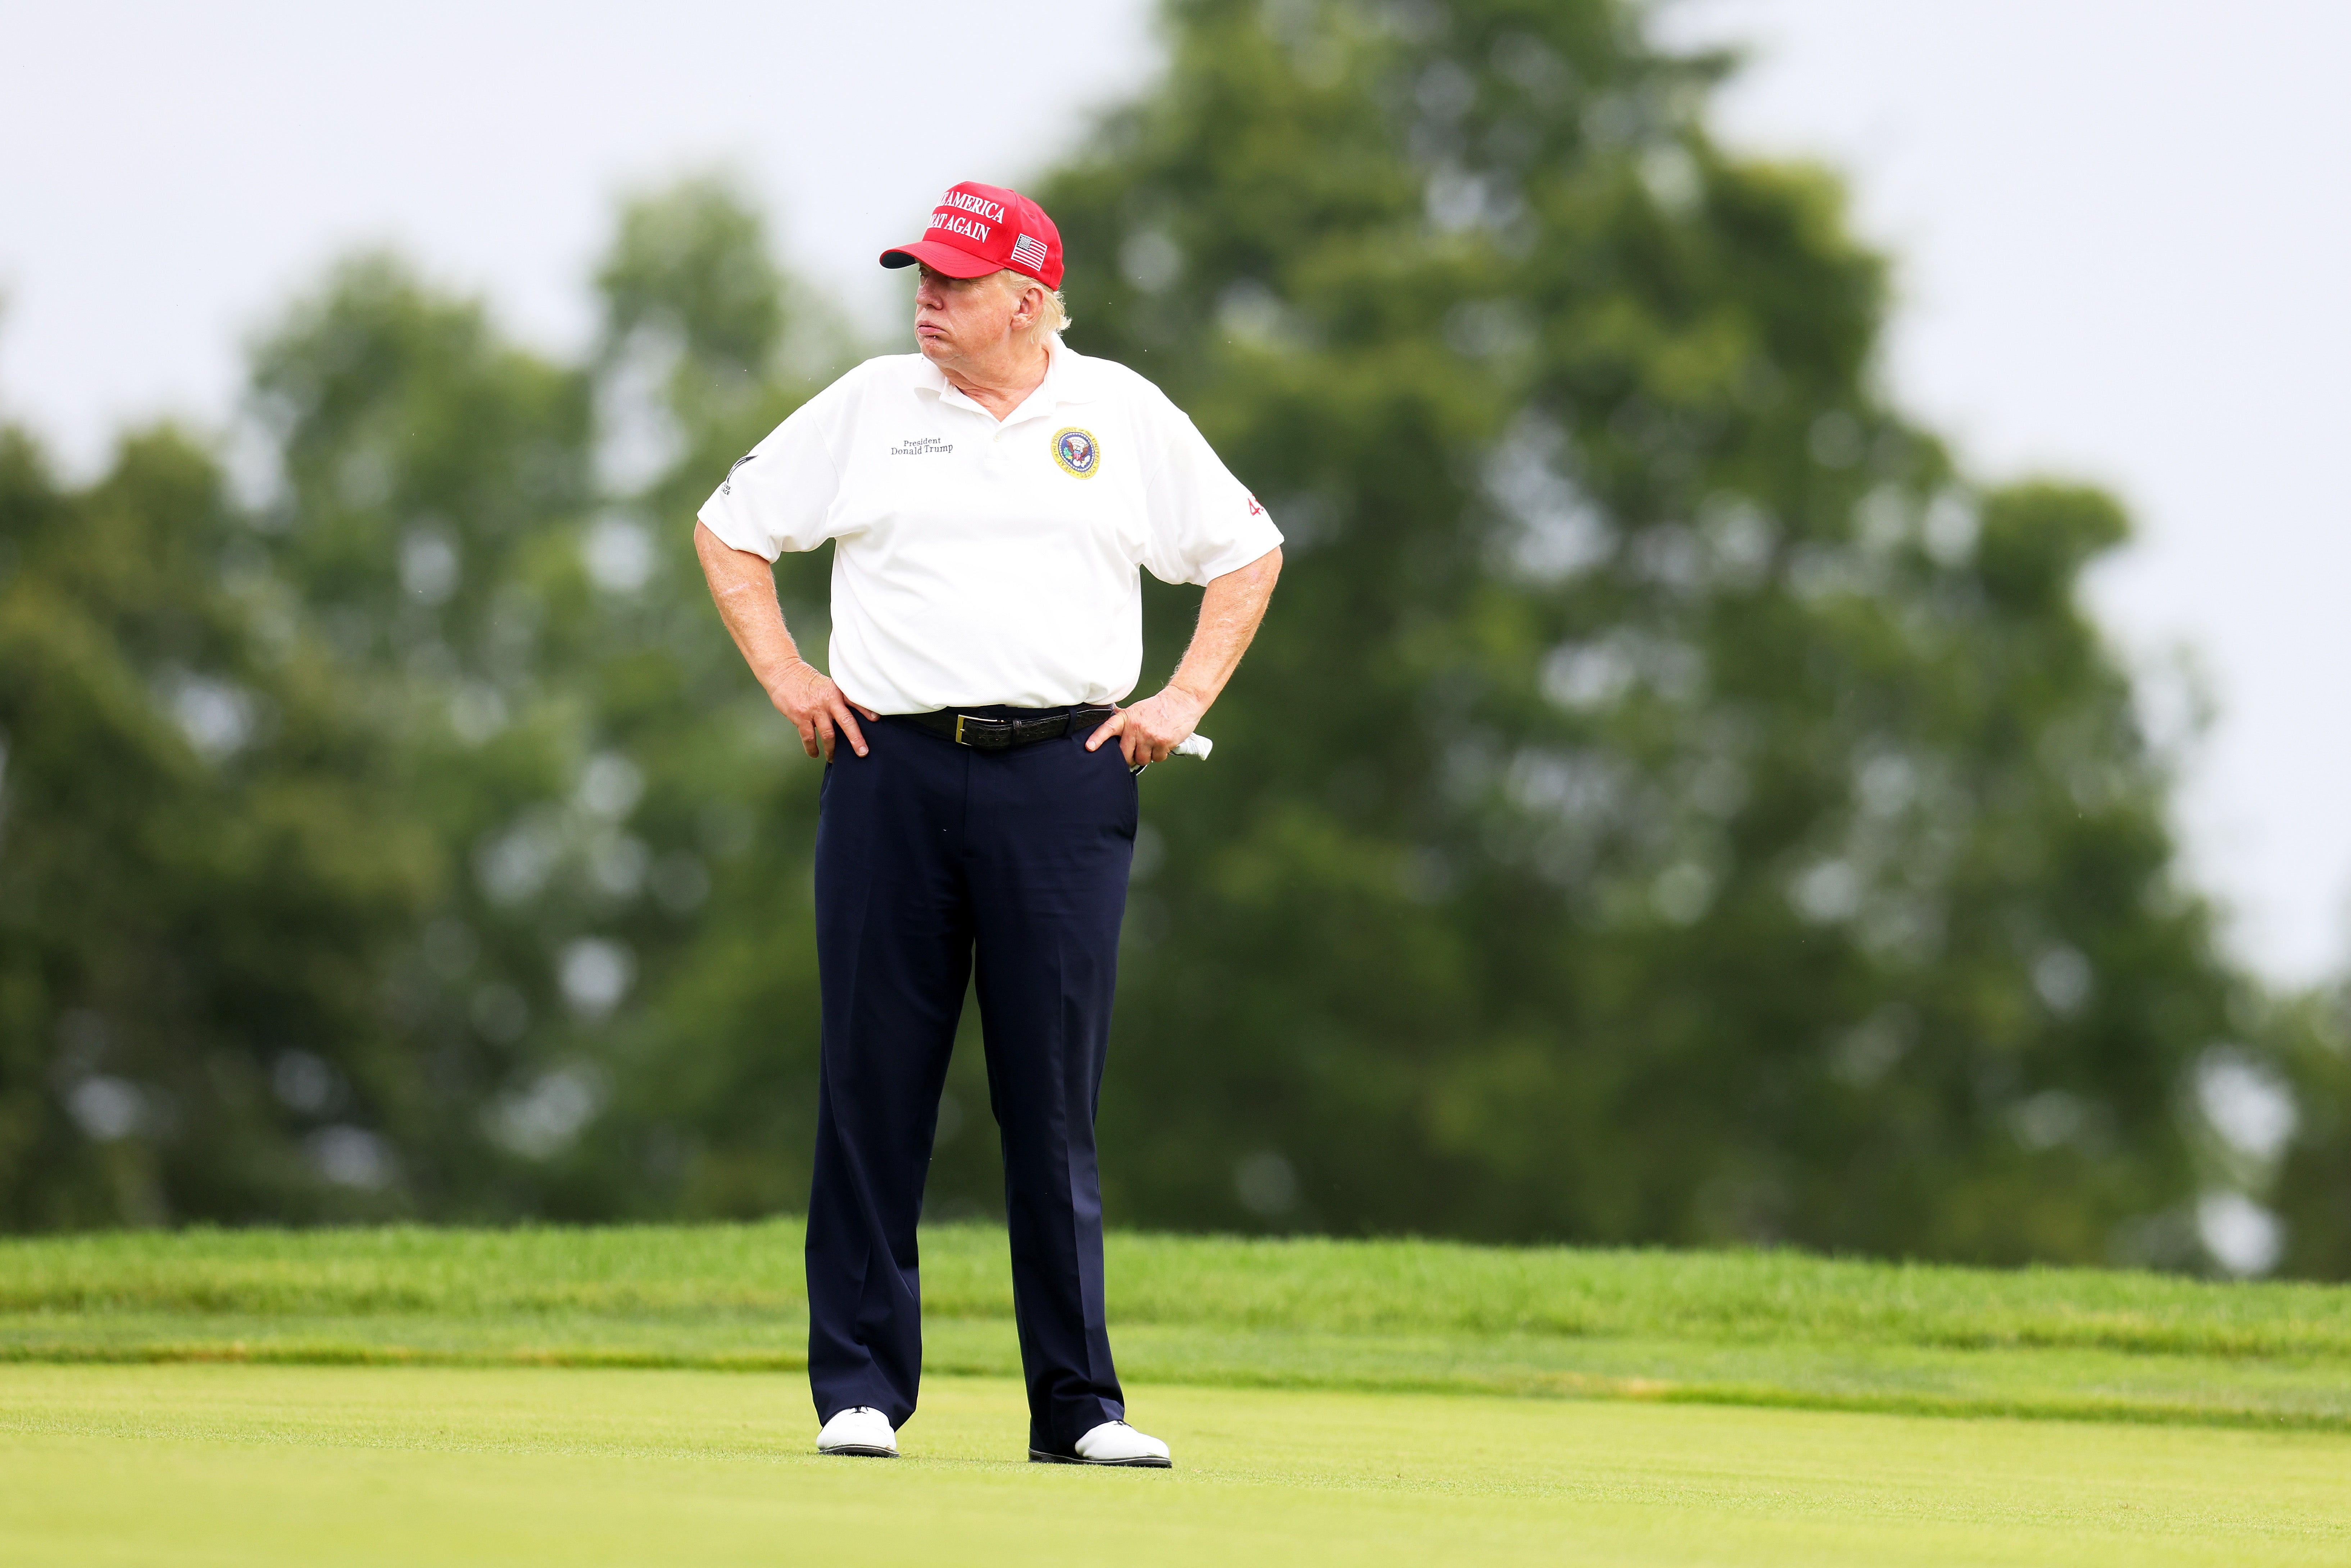 Former President Donald Trump looks on during the pro-am prior to the LIV Golf Invitational - Bedminster at Trump National Golf Club on August 10, 2023